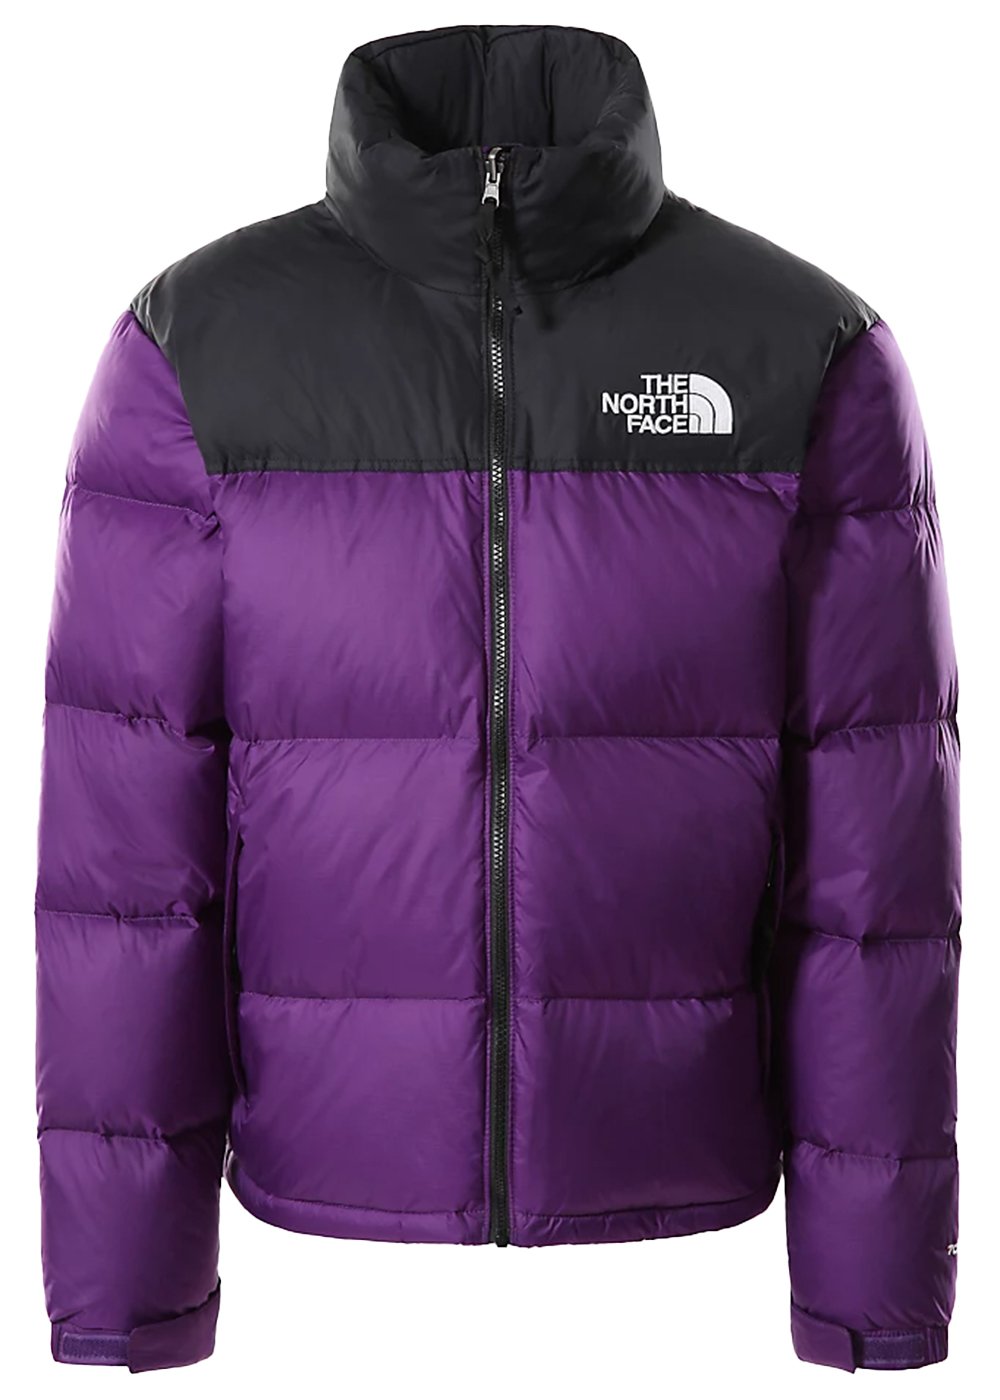 Puffer jacket The North Face 1996 Retro Nuptse 700 Fill Packable